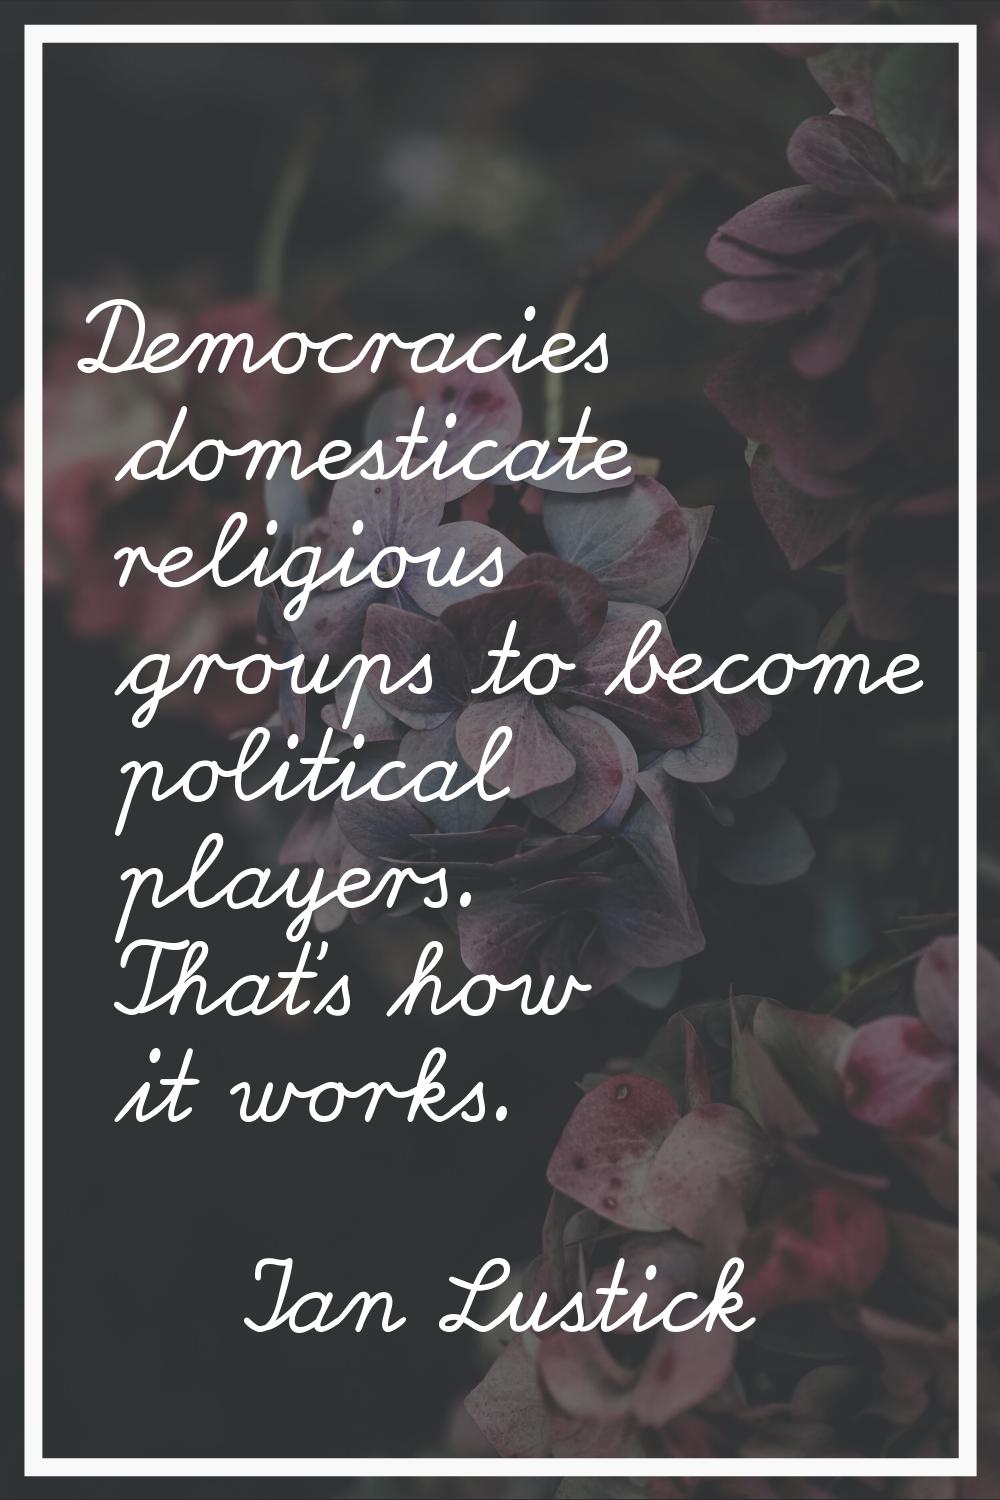 Democracies domesticate religious groups to become political players. That's how it works.